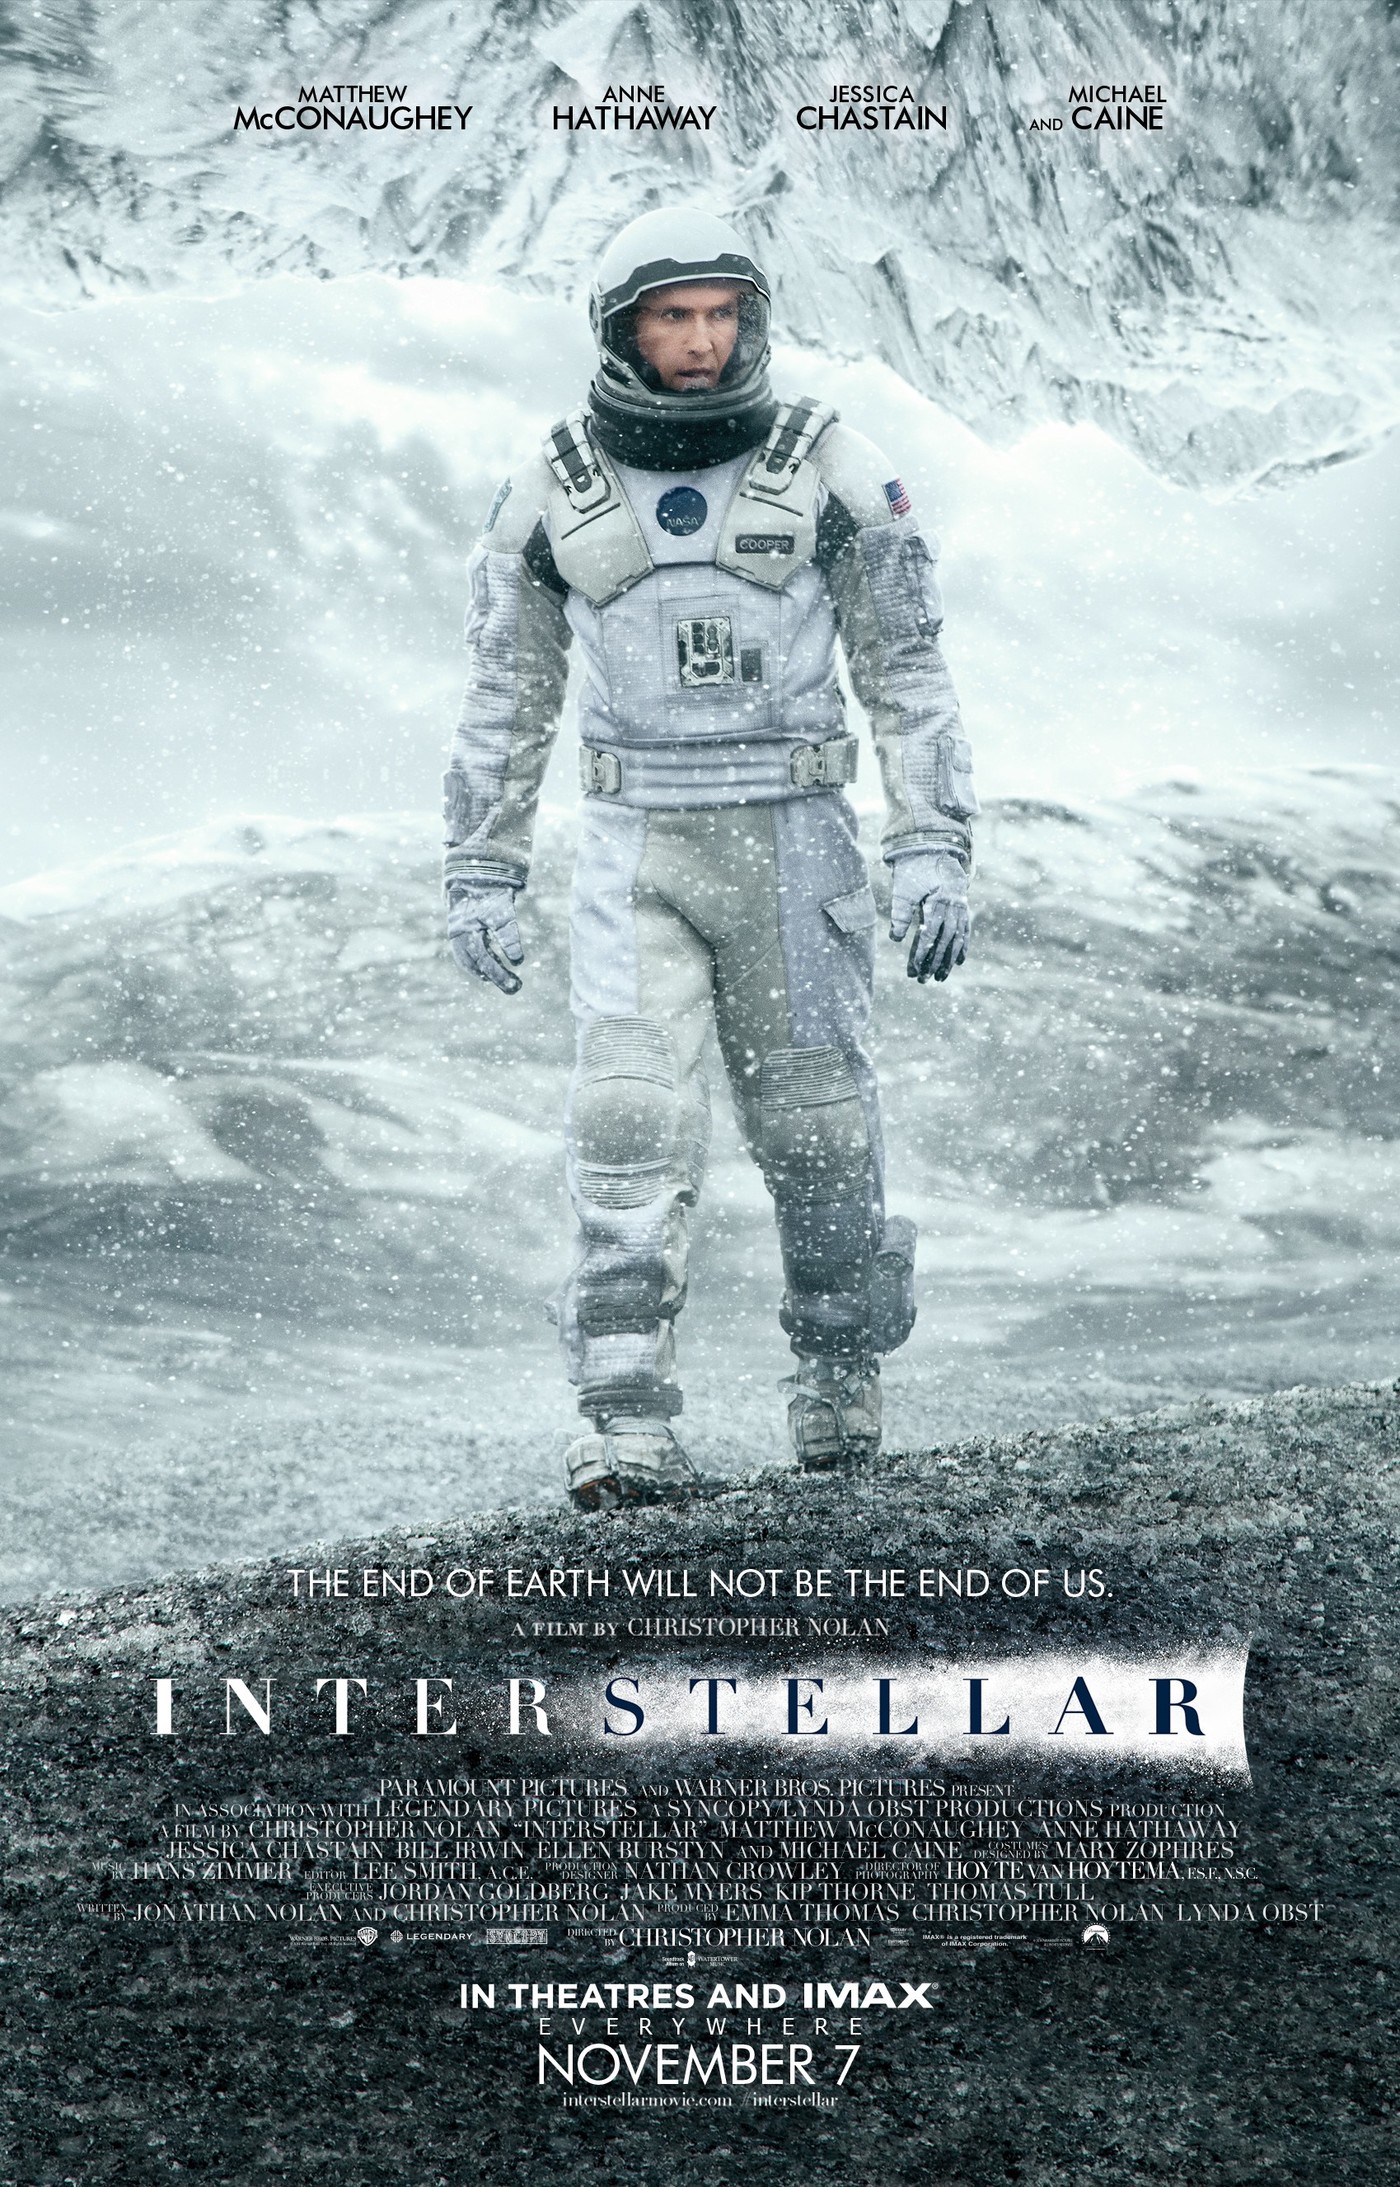 Interstellar movie posters and main title Fonts In Use